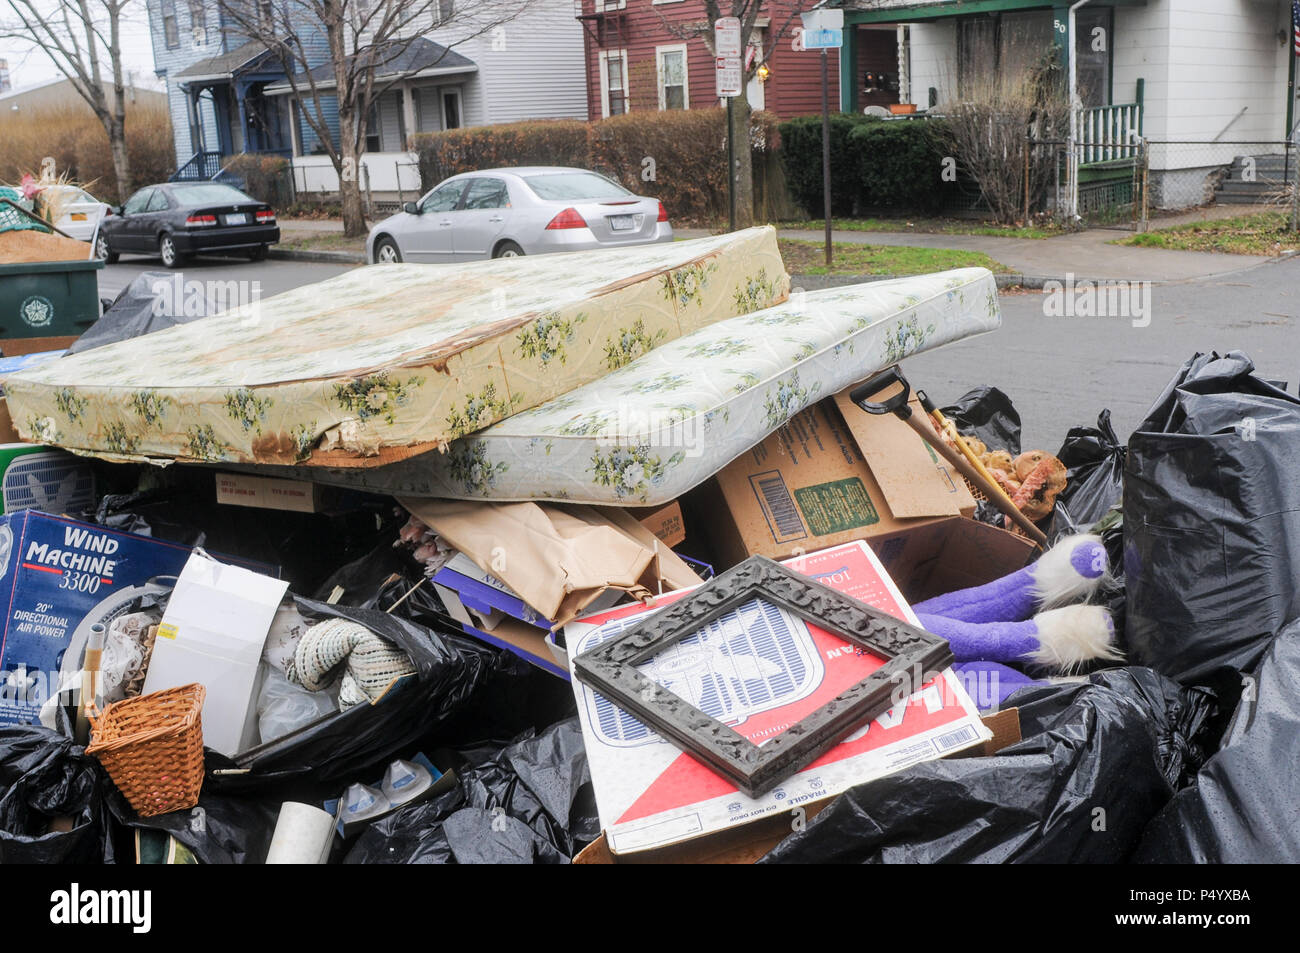 https://c8.alamy.com/comp/P4YXBA/pile-of-someones-stuff-thrown-on-the-curb-waiting-for-the-trash-truck-when-they-were-thrown-out-of-their-house-P4YXBA.jpg